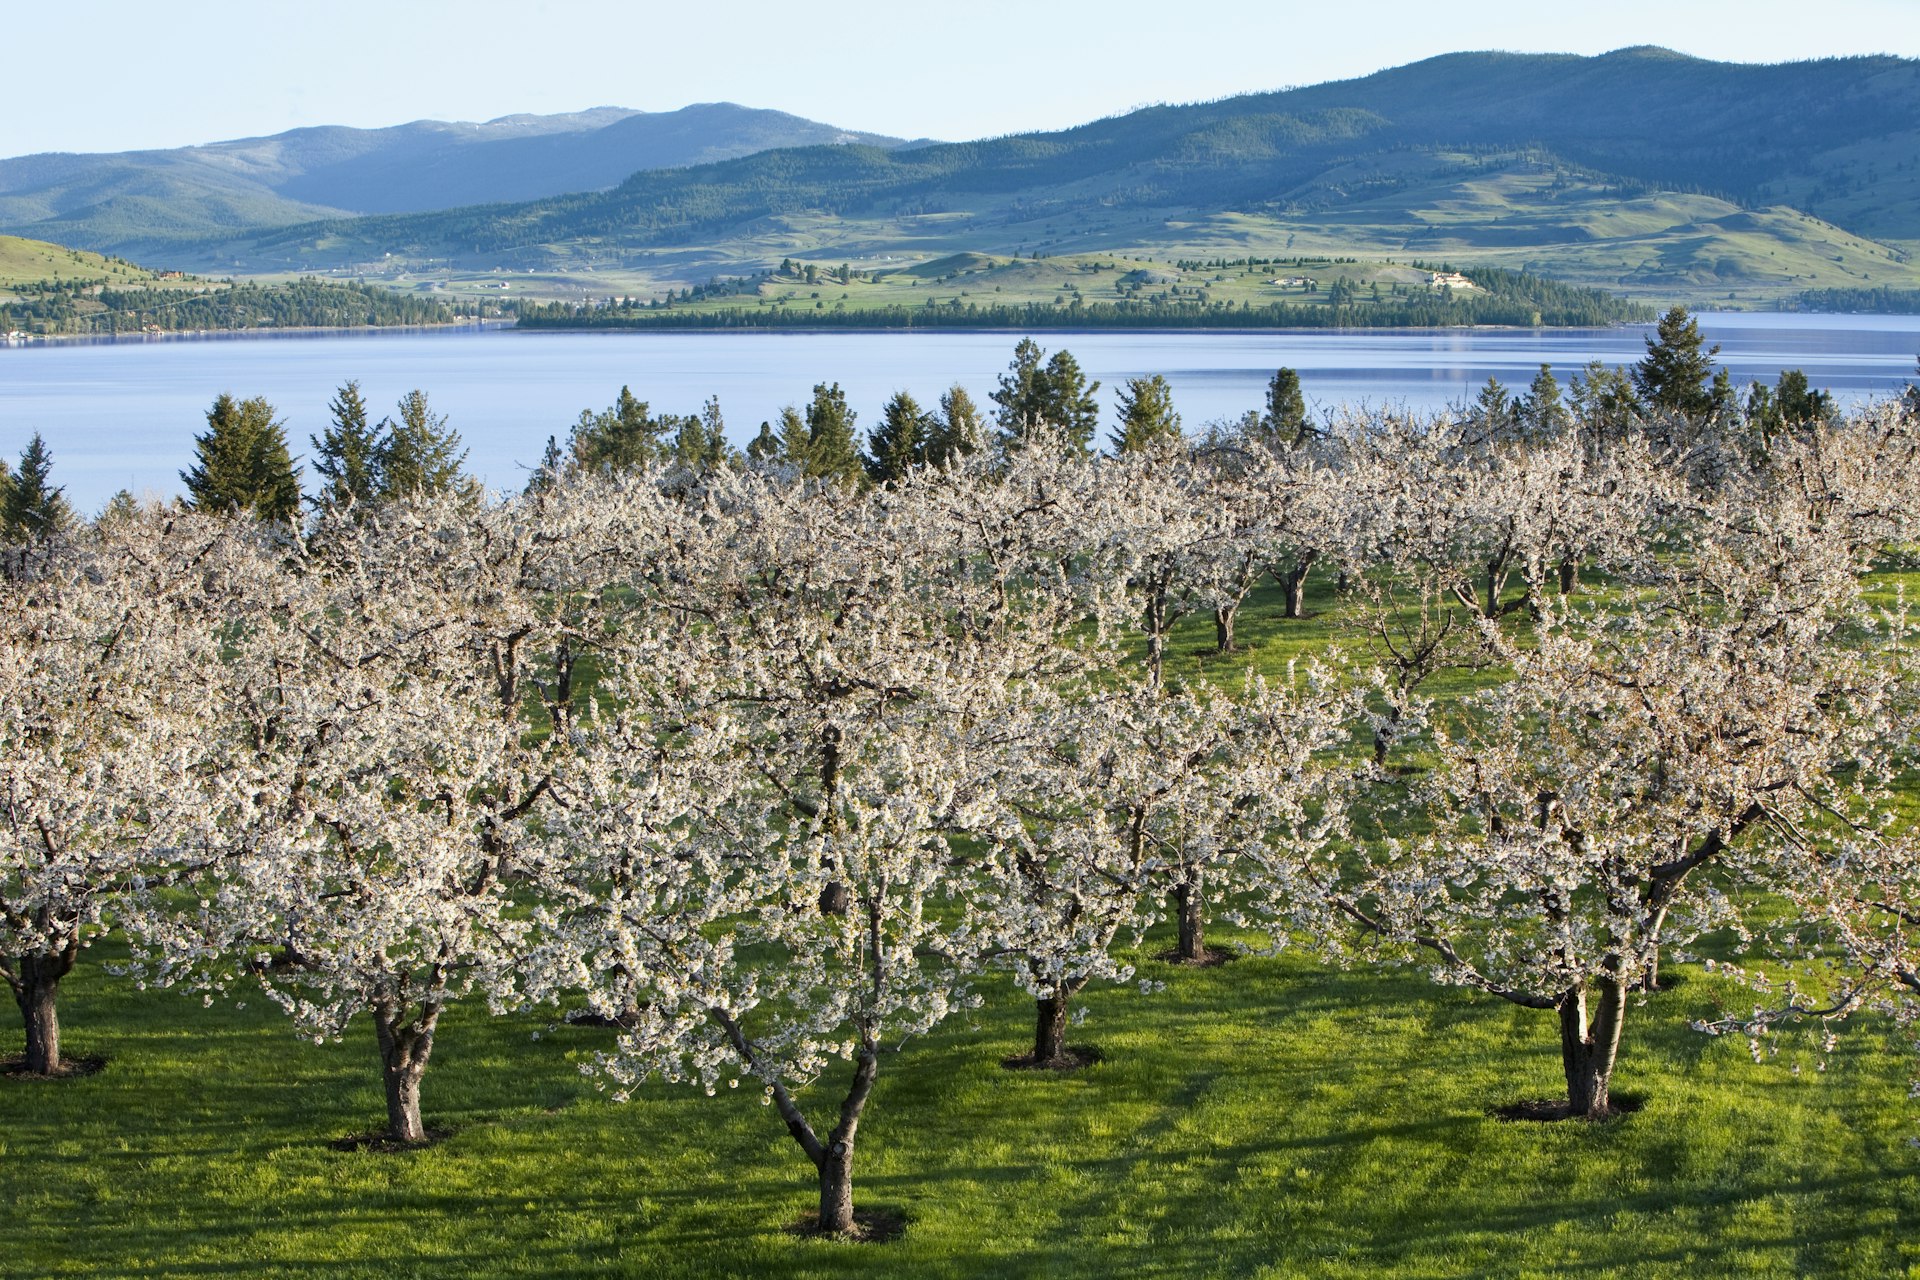 A view of a blooming cherry orchard on the shores of Flathead Lake, framed by mountains in the background